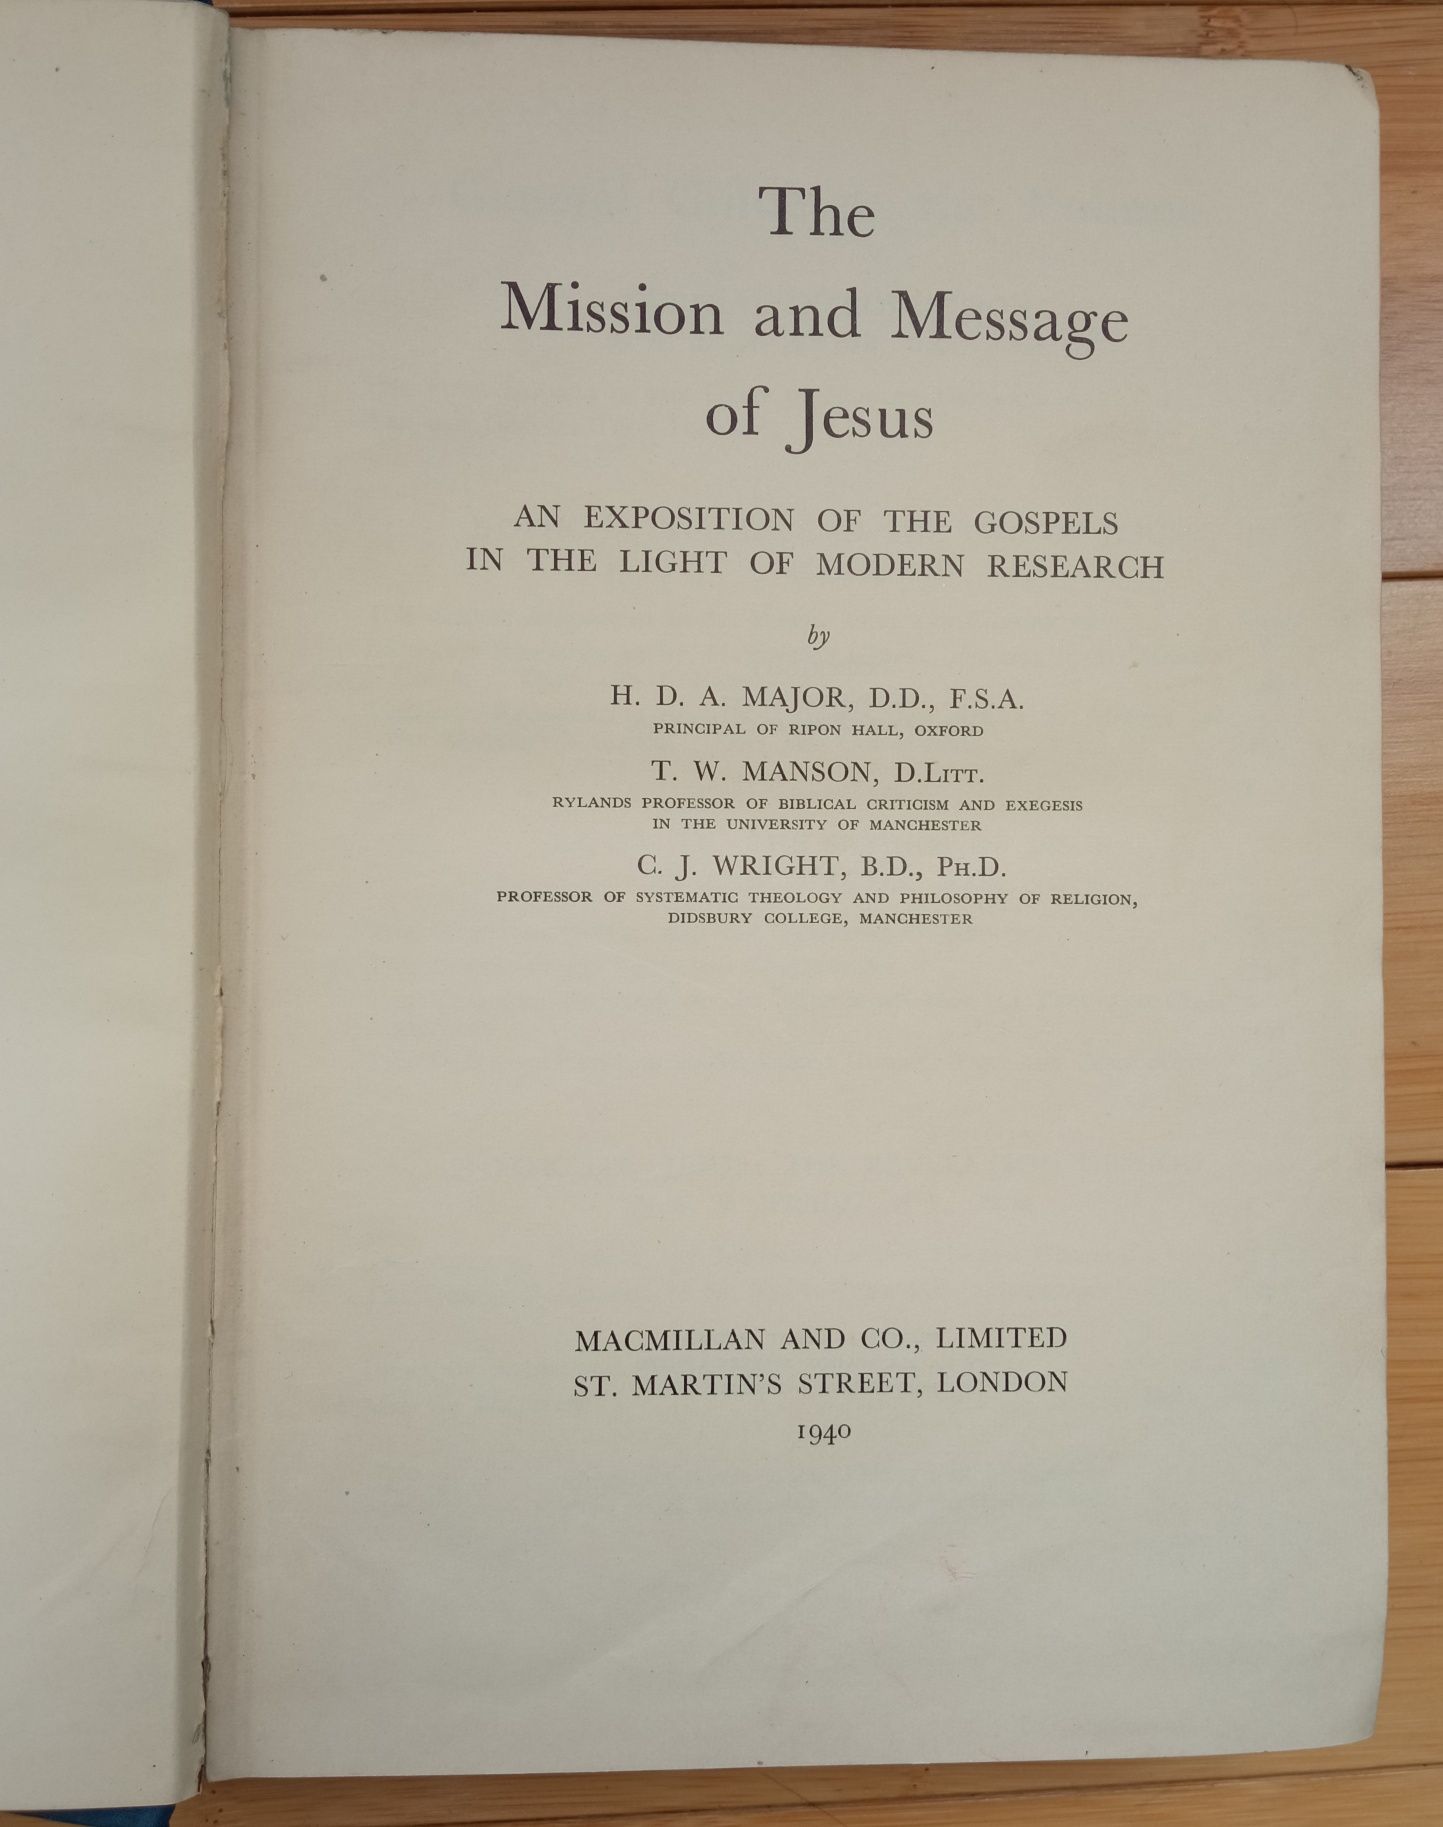 The mission and  message of Jesus - Major, Manson, Wright